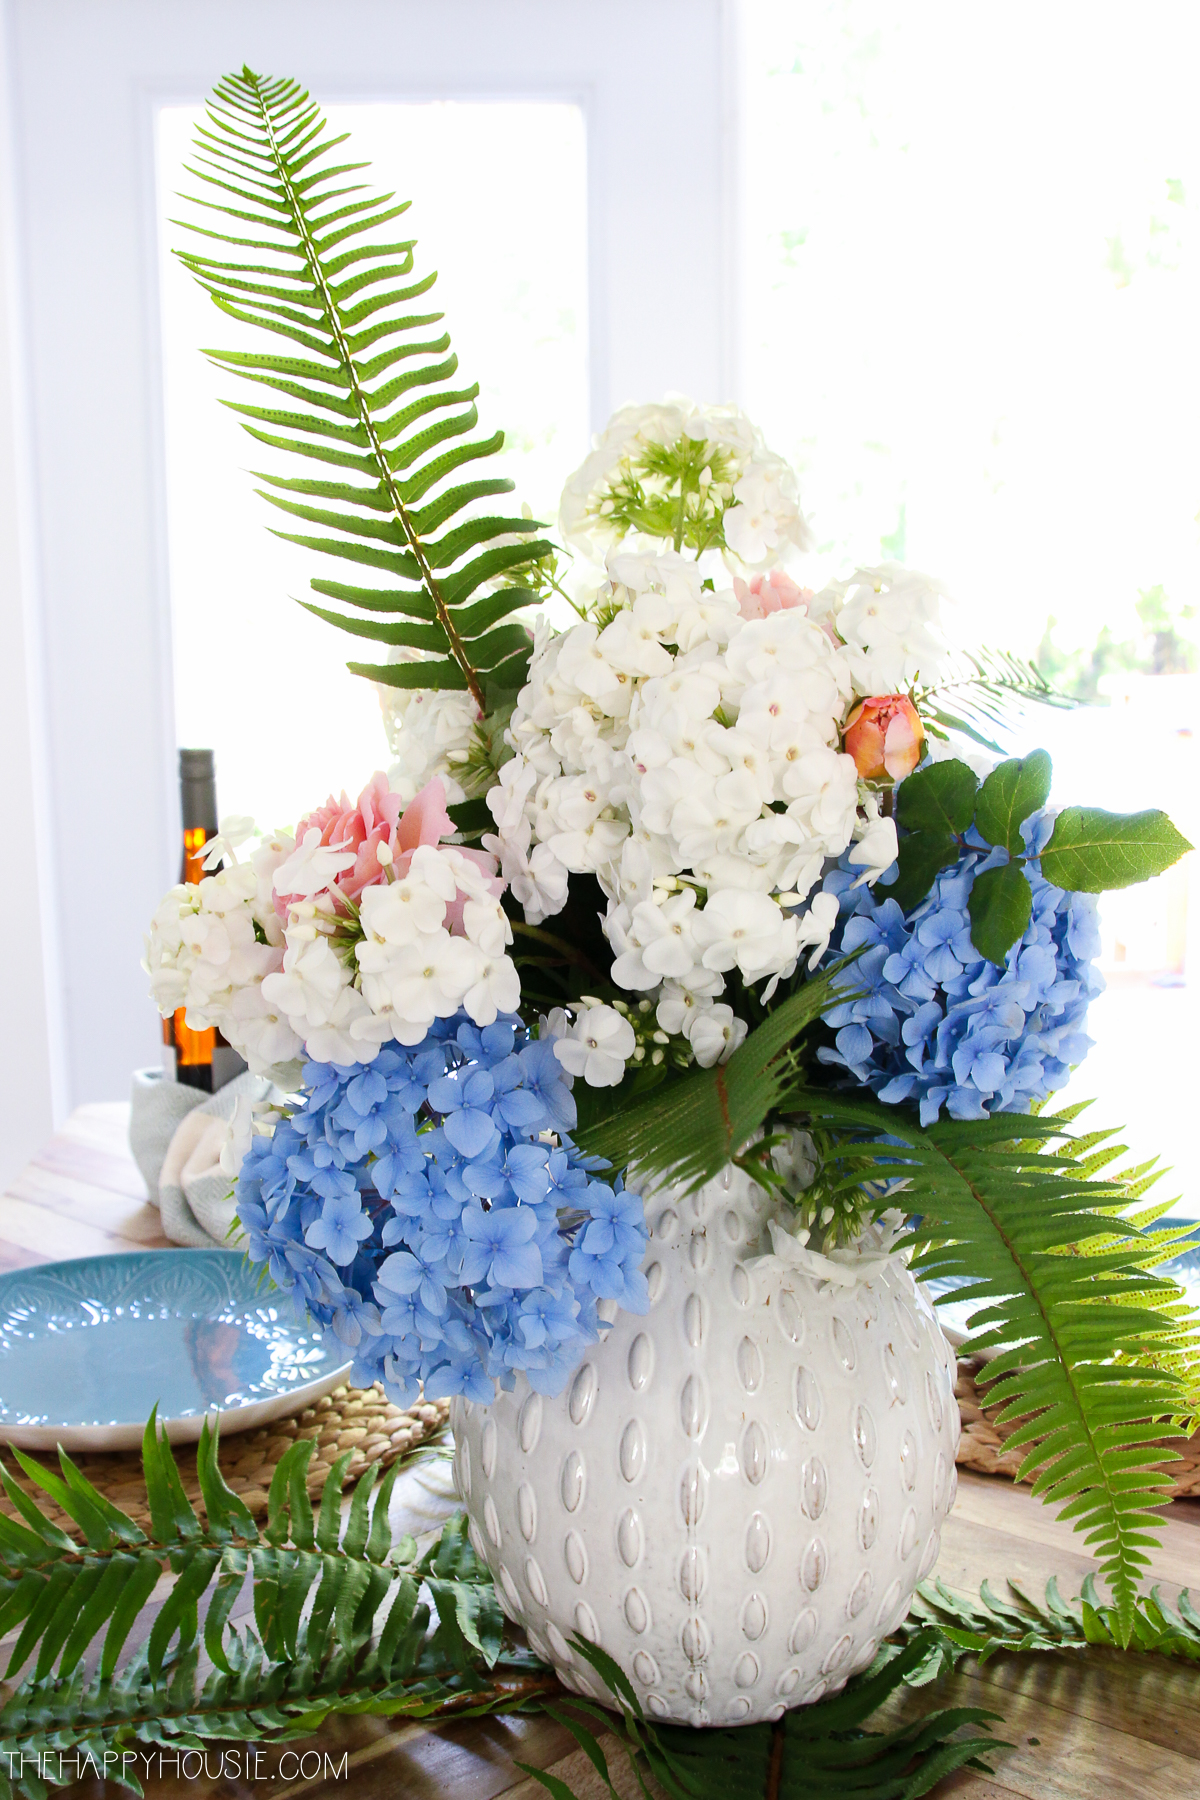 White, blue and ferns in a white vase on the table.